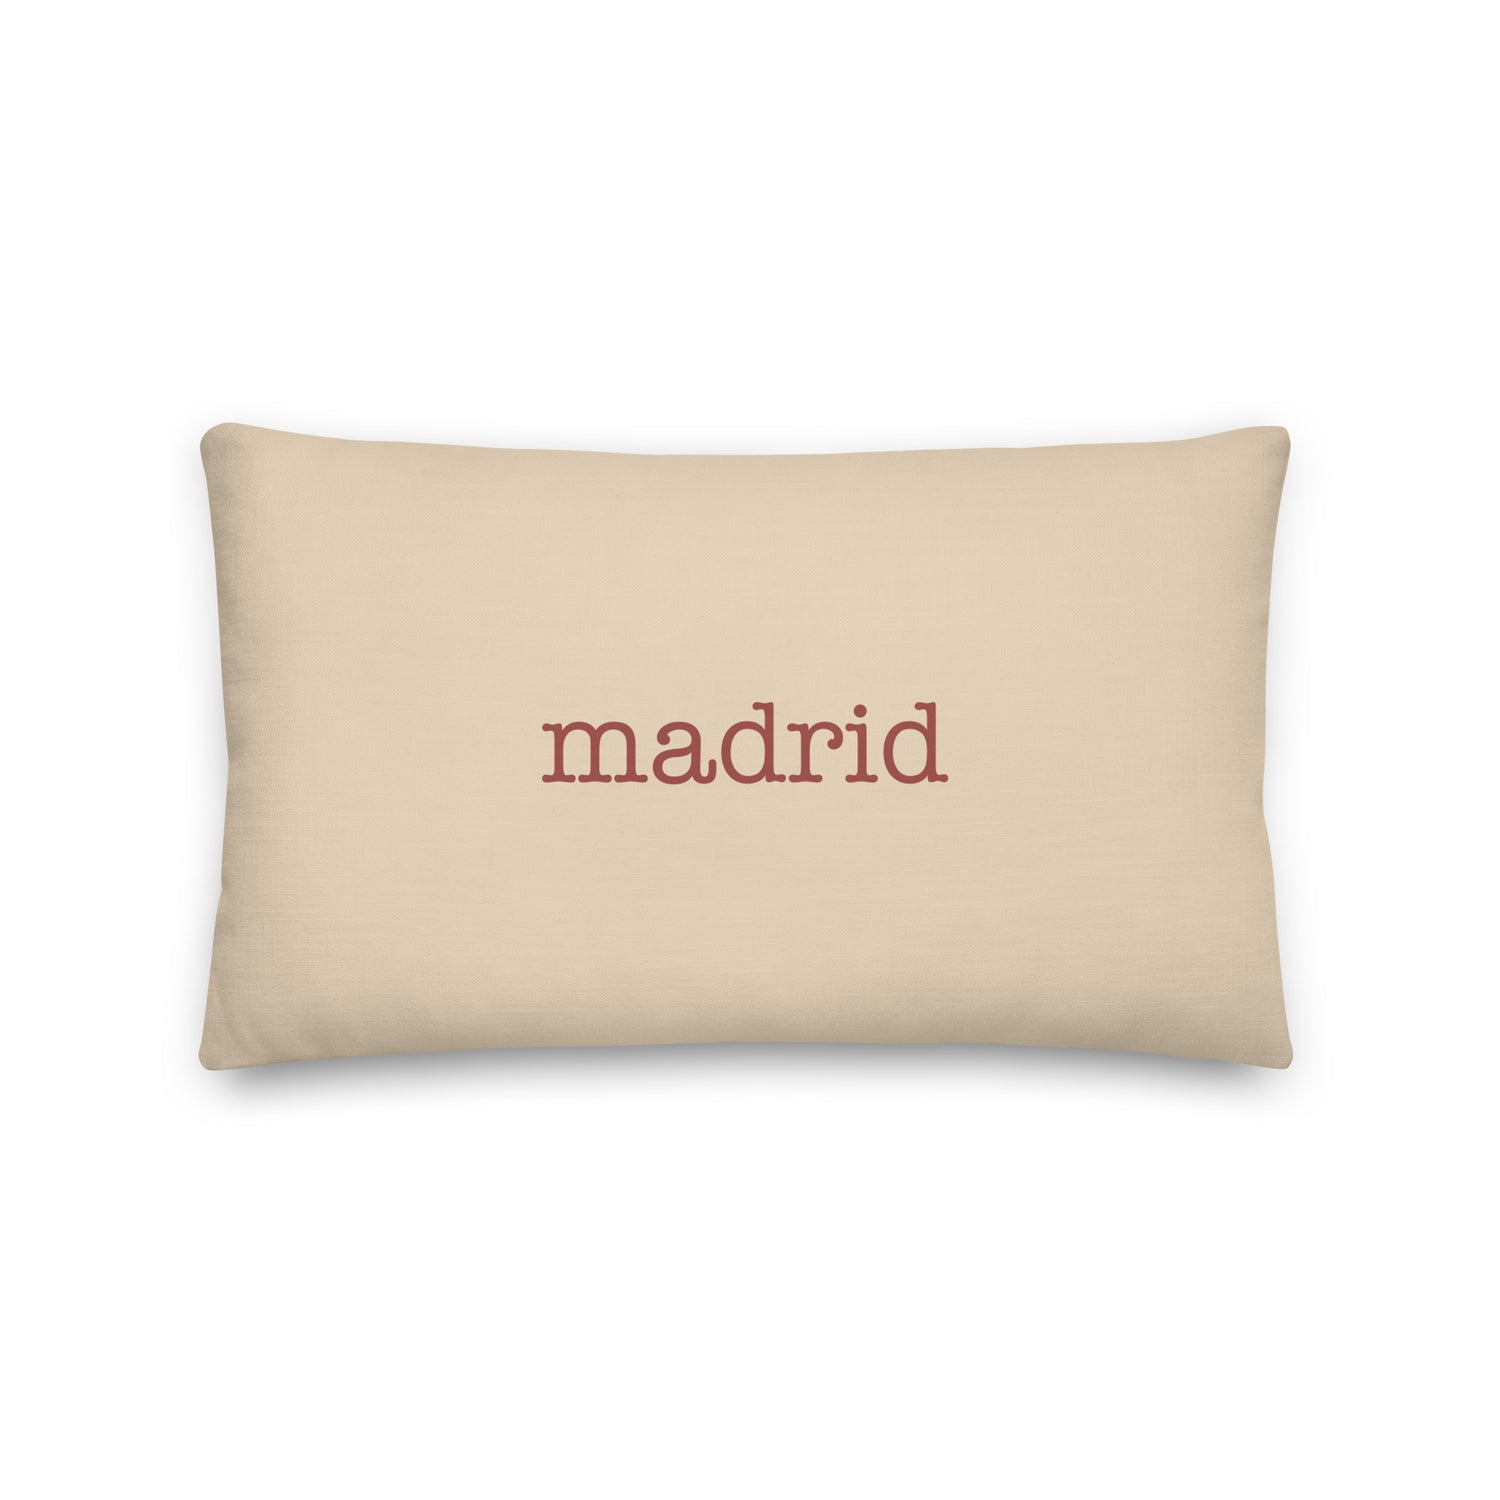 Madrid Spain Pillows and Blankets • MAD Airport Code